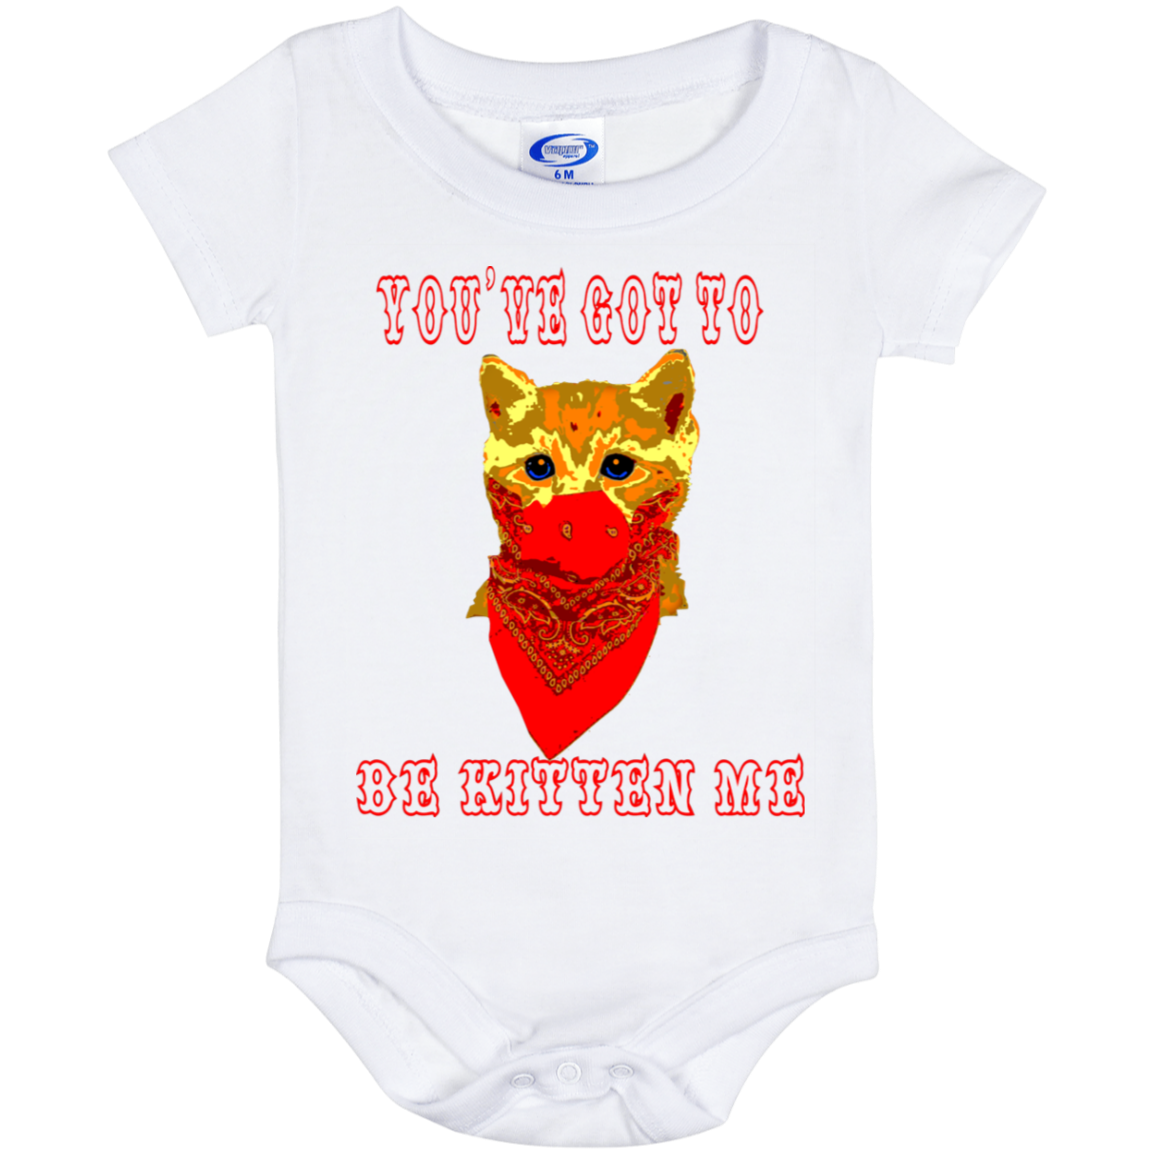 ArtichokeUSA Custom Design. You've Got To Be Kitten Me?! 2020, Not What We Expected. Baby Onesie 6 Month